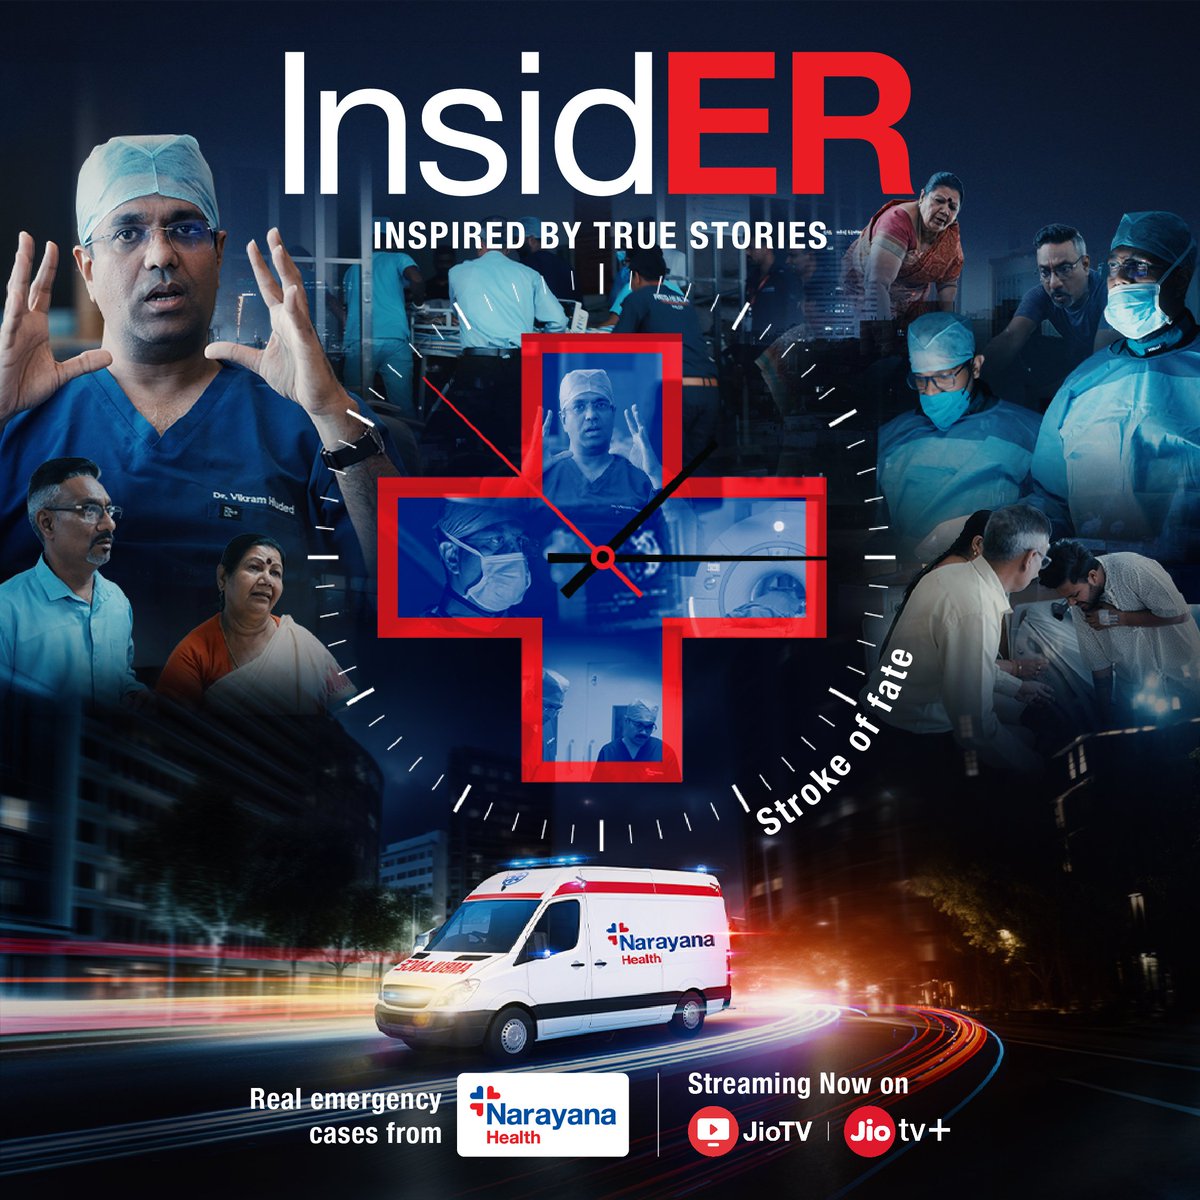 A routine interrupted, a life on the line. Witness the critical race against time to save Deepak's life. Now streaming on JioTV and JioTV+ 📺 @NarayanaHealth #InsidER #Emergency #NewRelease #WatchOnJioTV #WatchOnJioTVPlus #TakeCare #NarayanaHealth